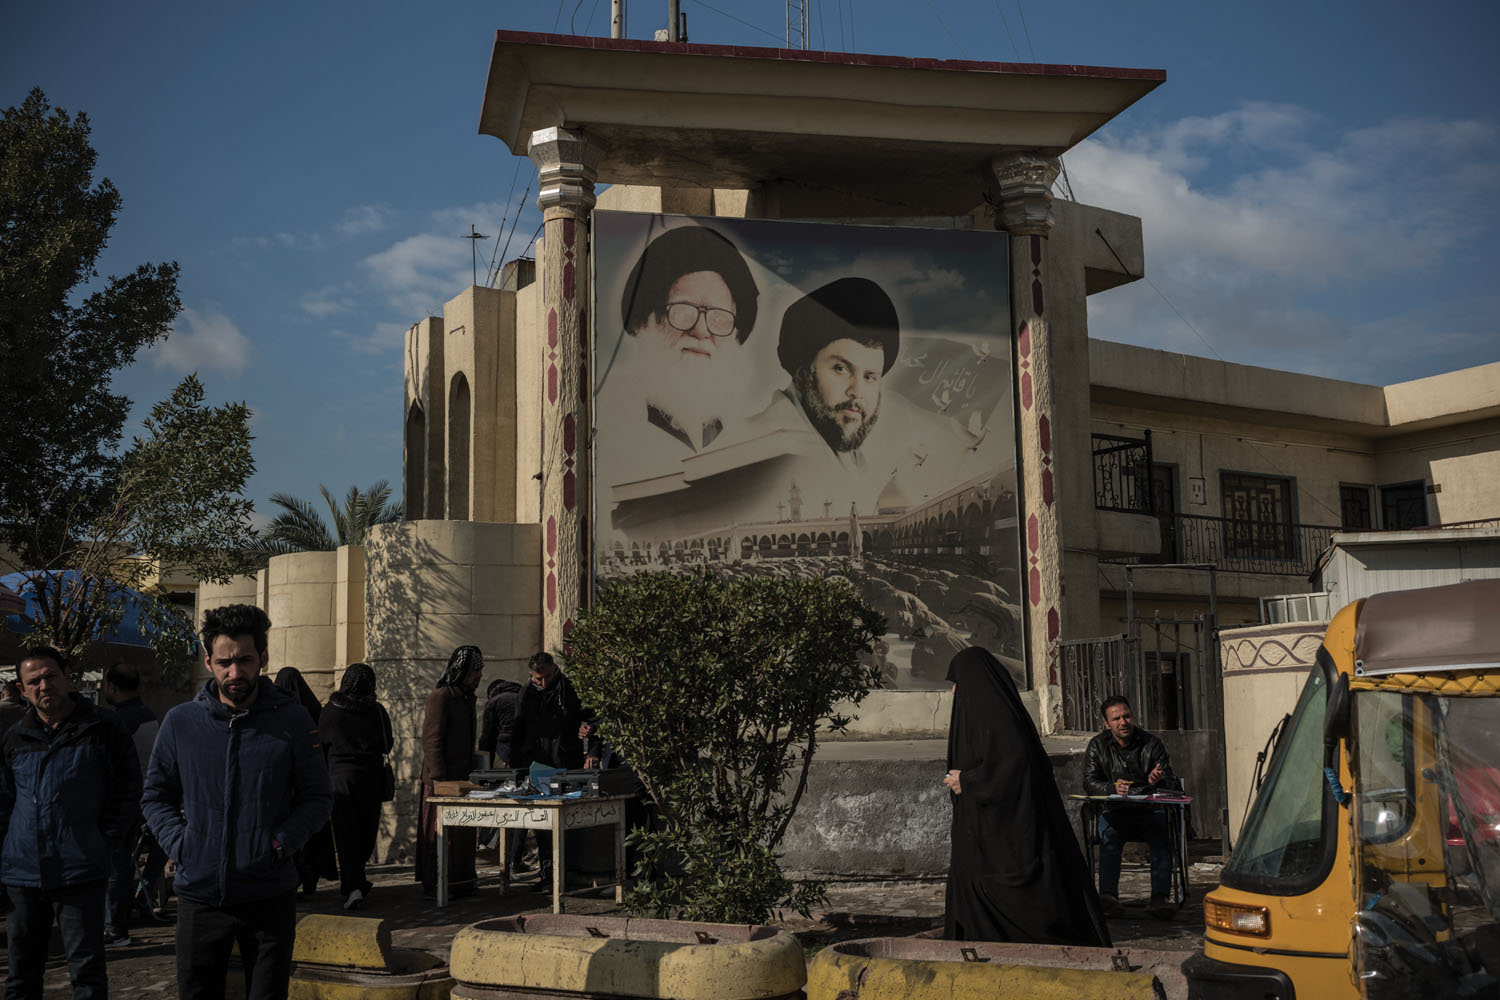 A billboard of Shia cleric Muqtada al-Sadr and his late father, Mohammed Sadeq al-Sadr, in Baghdad's largest slum, Sadr City. Muqtada al-Sadr was an early supporter of the protesters, but his position has been inconsistent; many speculate that his recent critiques of the movement are the result of Iranian financial backing.